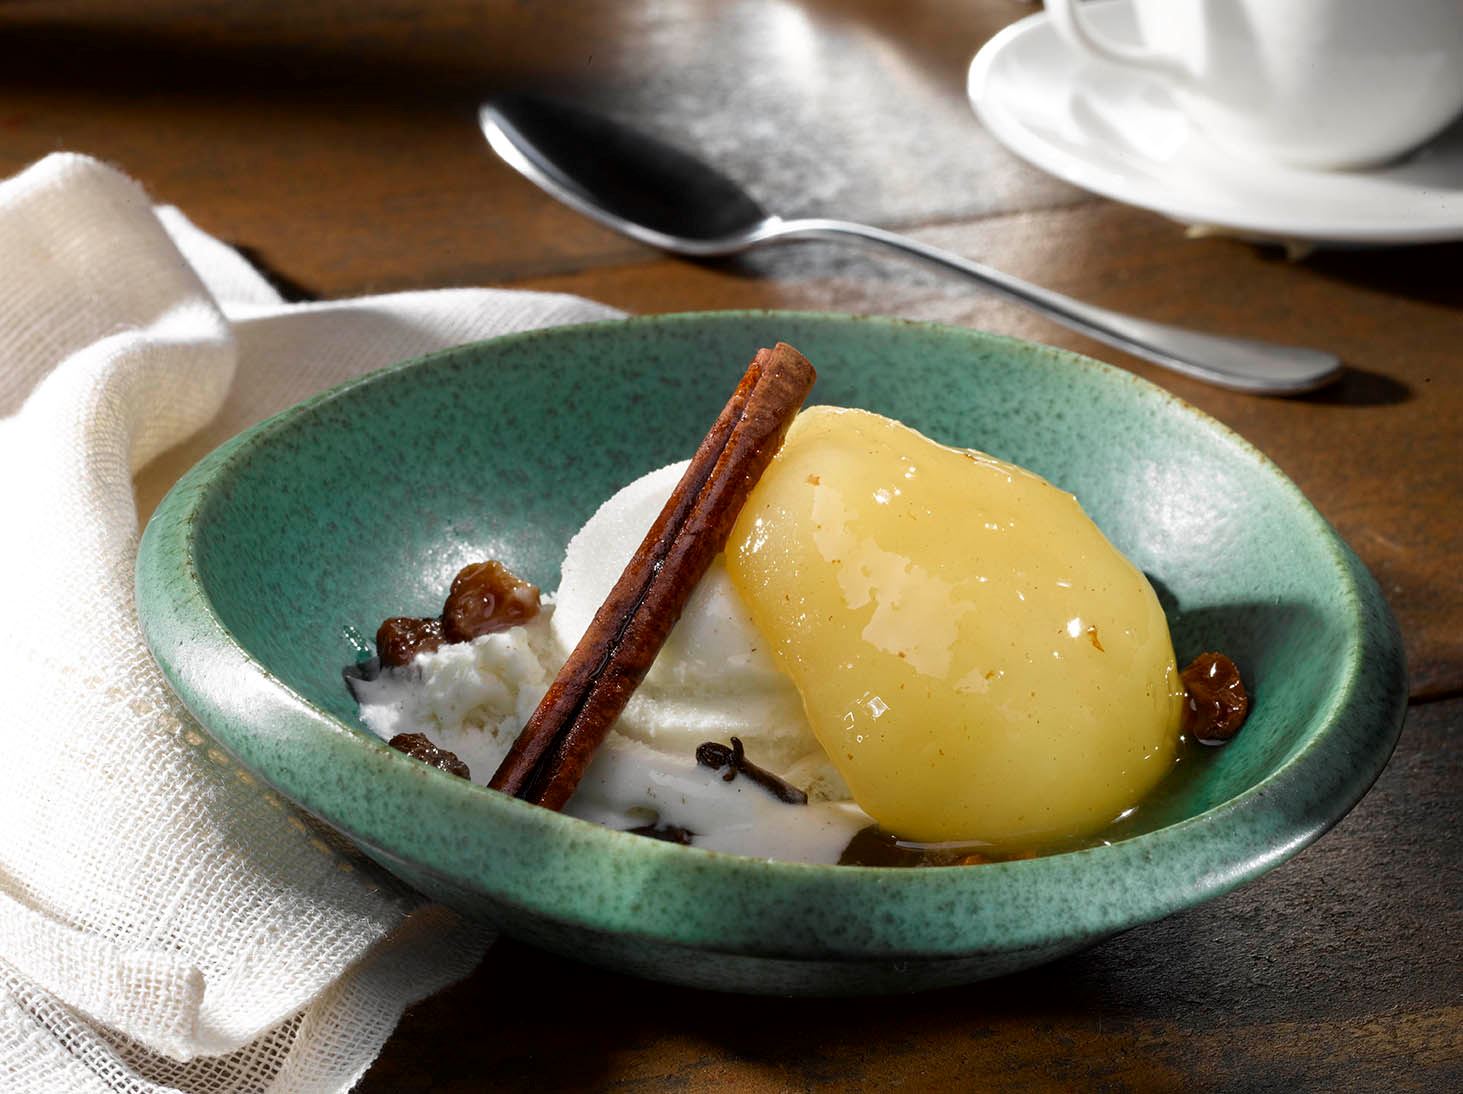 Poached Pears with Cinnamon and Vanilla